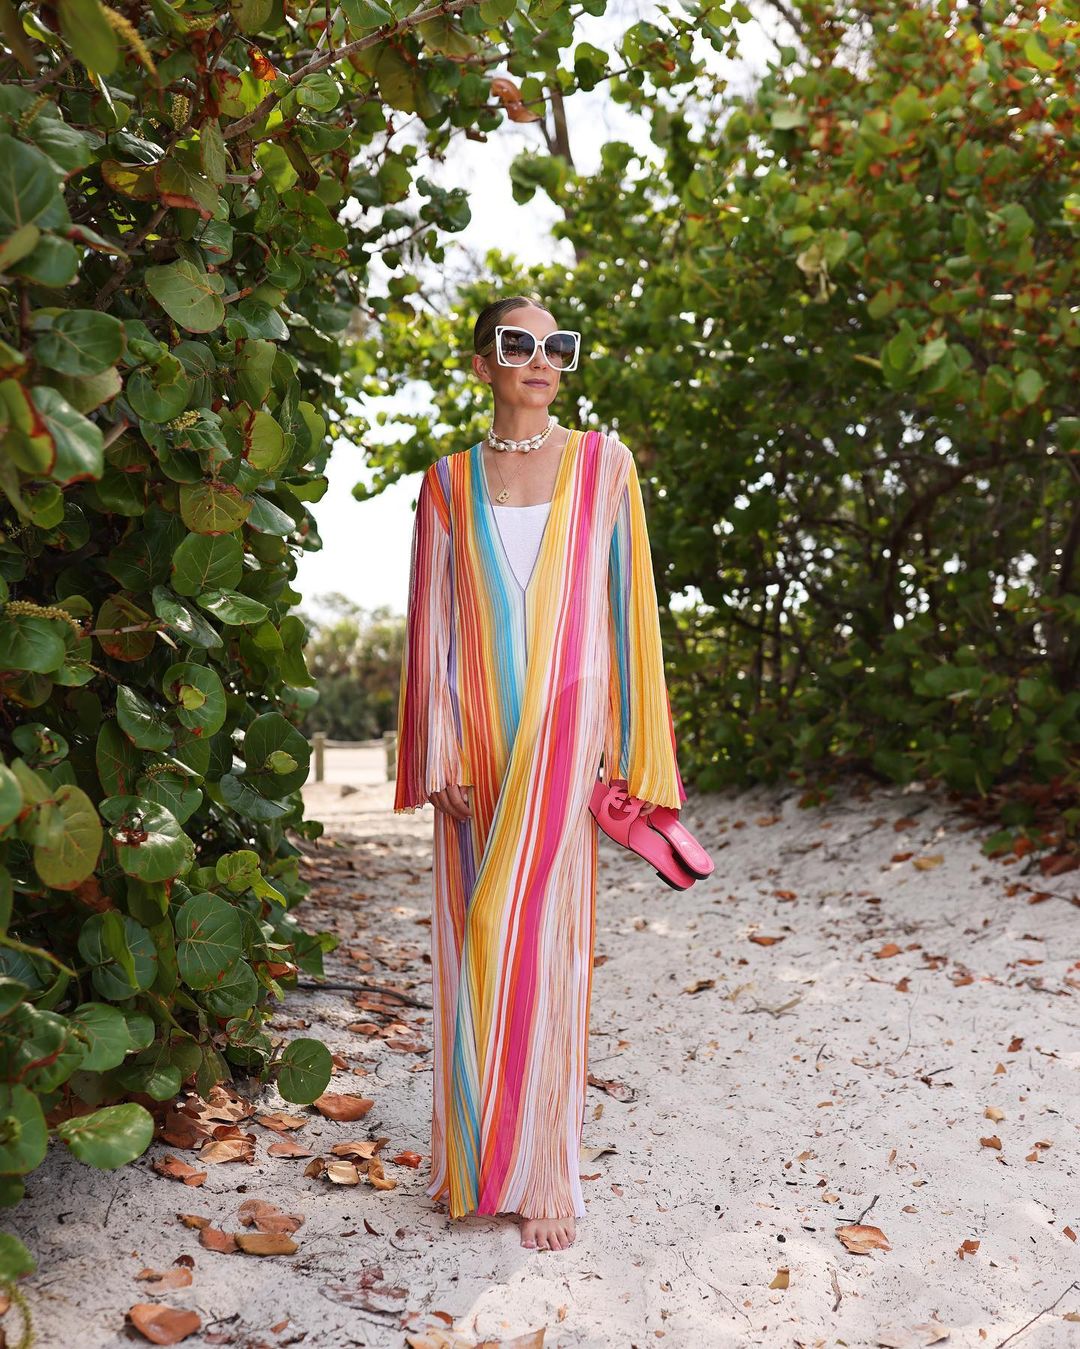 Celebrate Summer With These 10 Beach Vacation Outfits